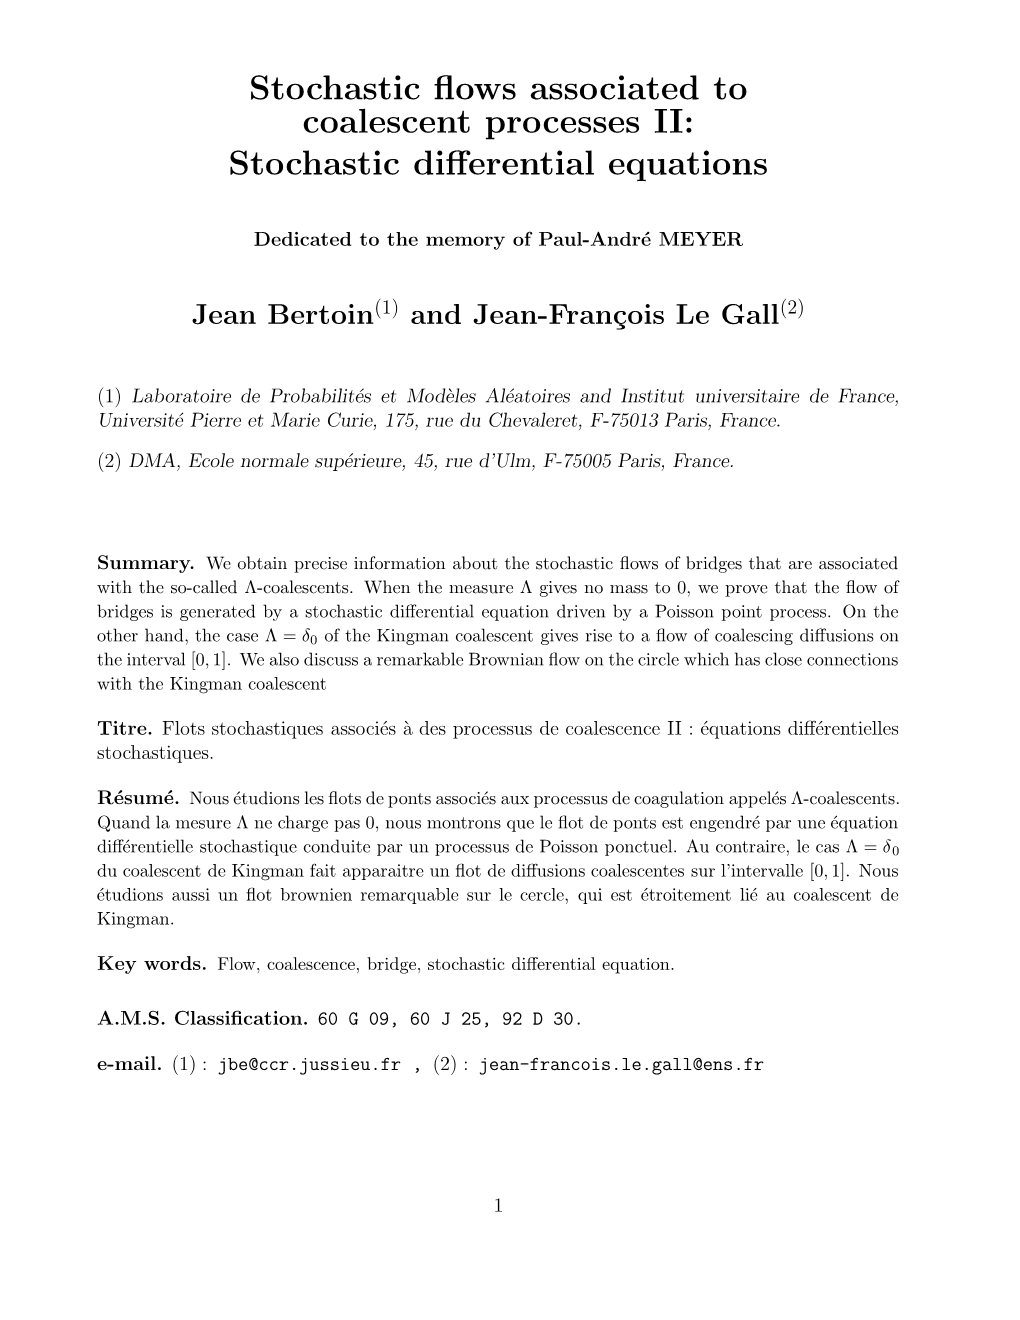 Stochastic Flows Associated to Coalescent Processes II